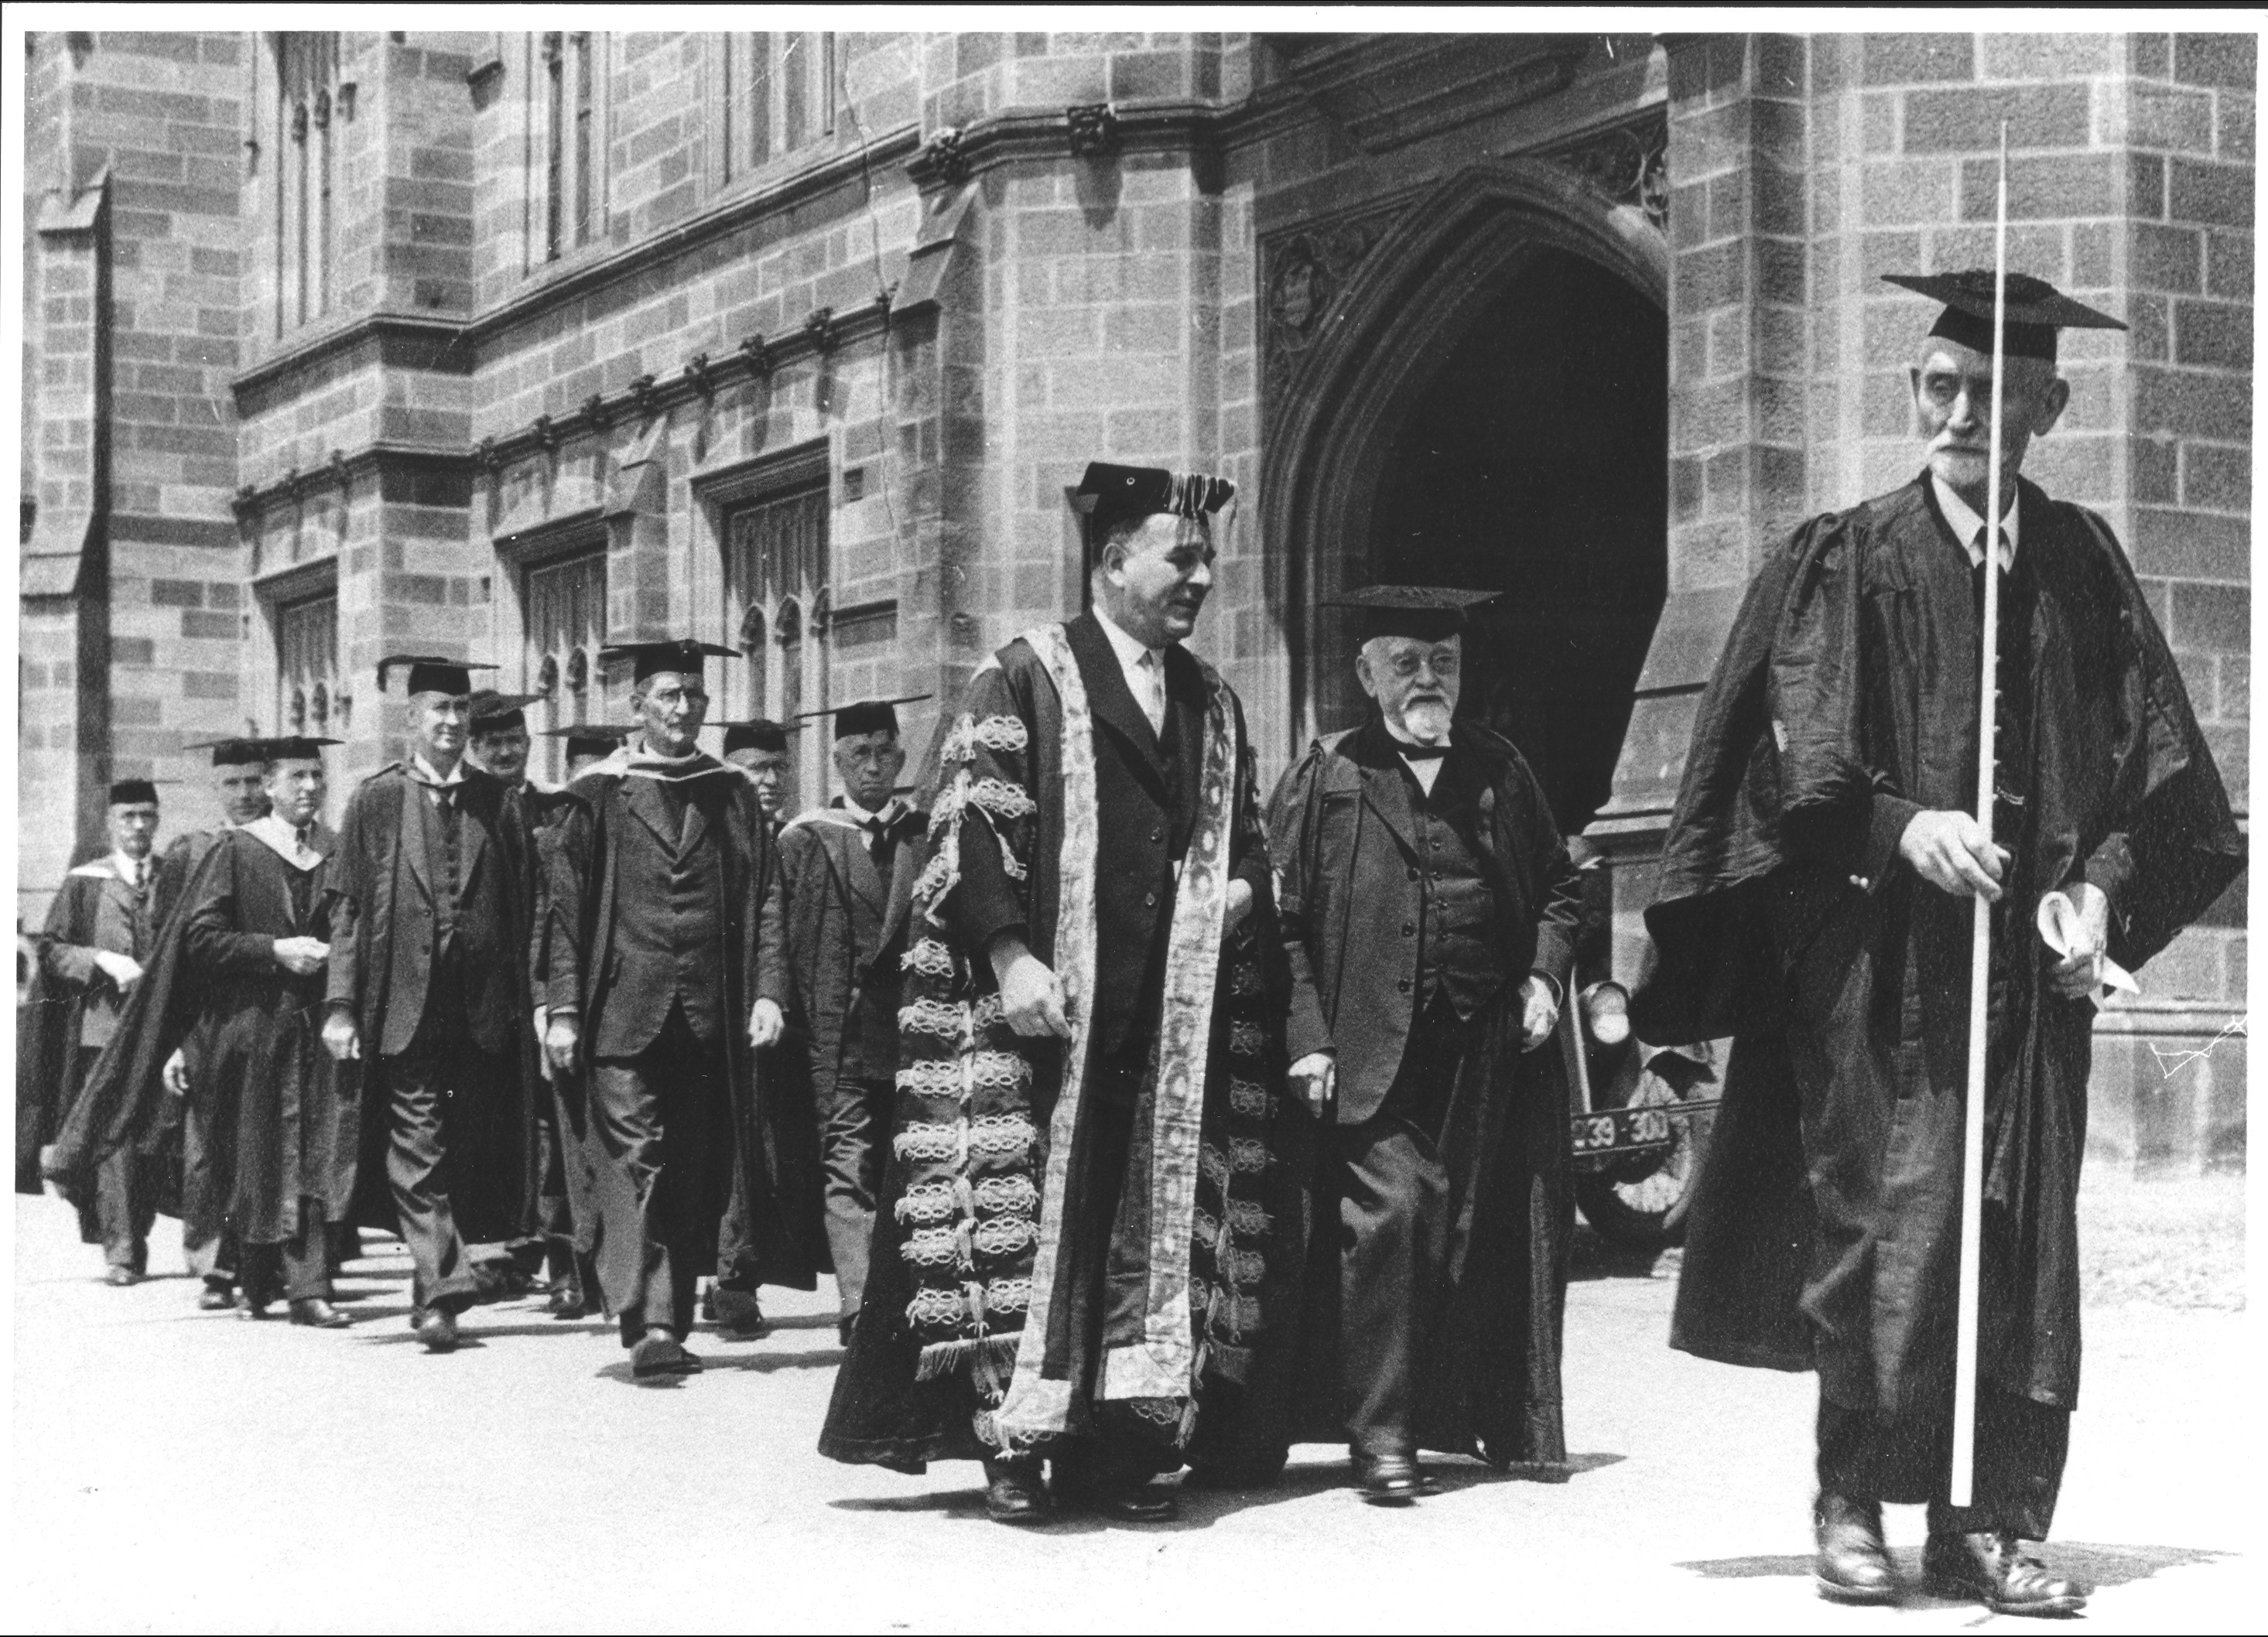 ACADEMIC PROCESSION IN FRONT OF CLOCK TOWER